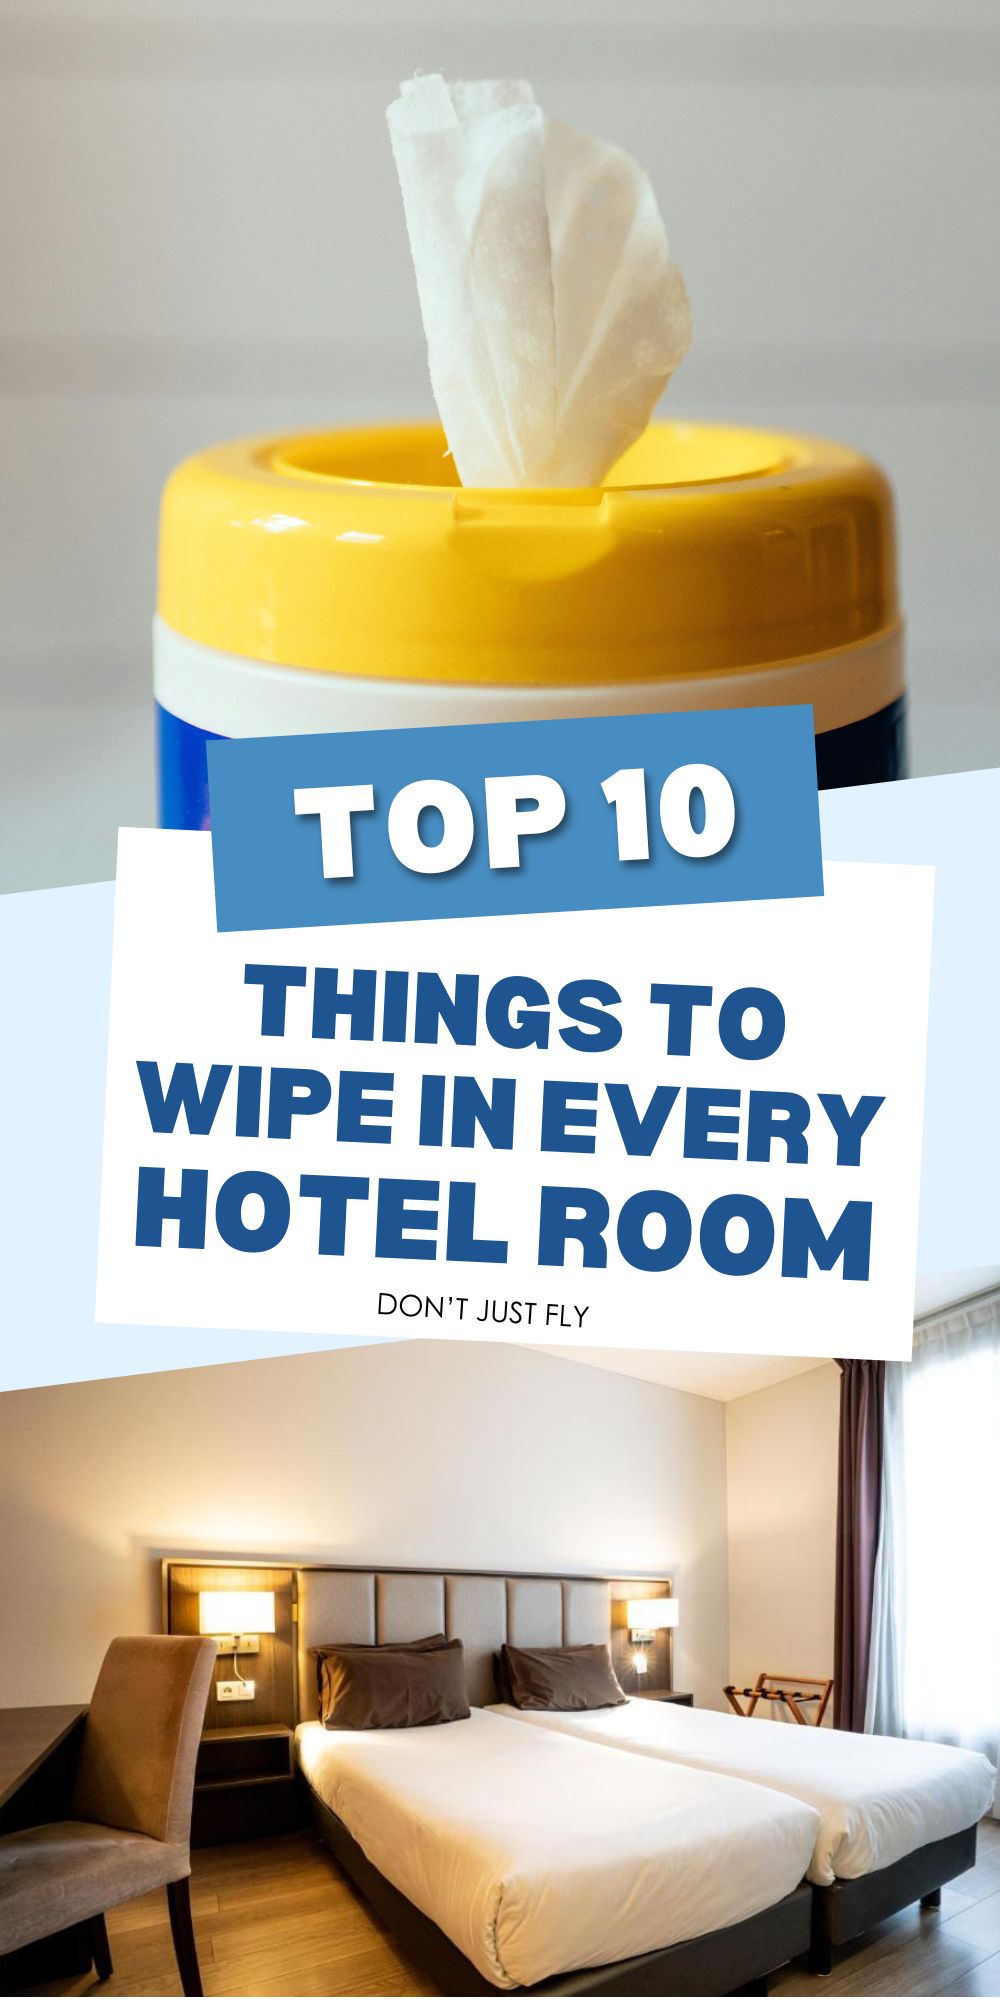 A photo collage shows a bottle of bleach wipes next to a photo of a hotel room.